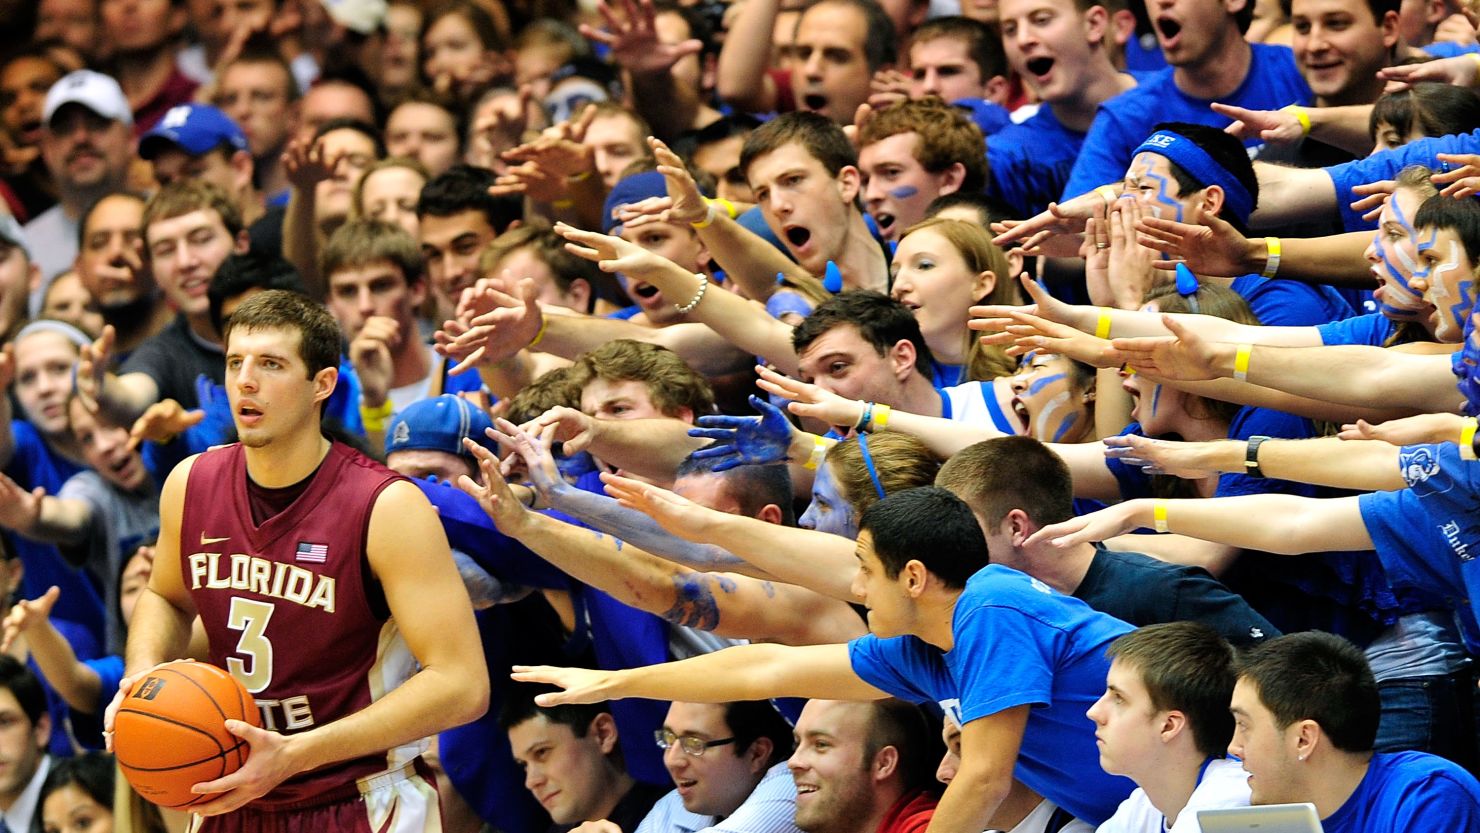 At Cameron Indoor Stadium, Duke fans do their best to distract players on the opposing team.